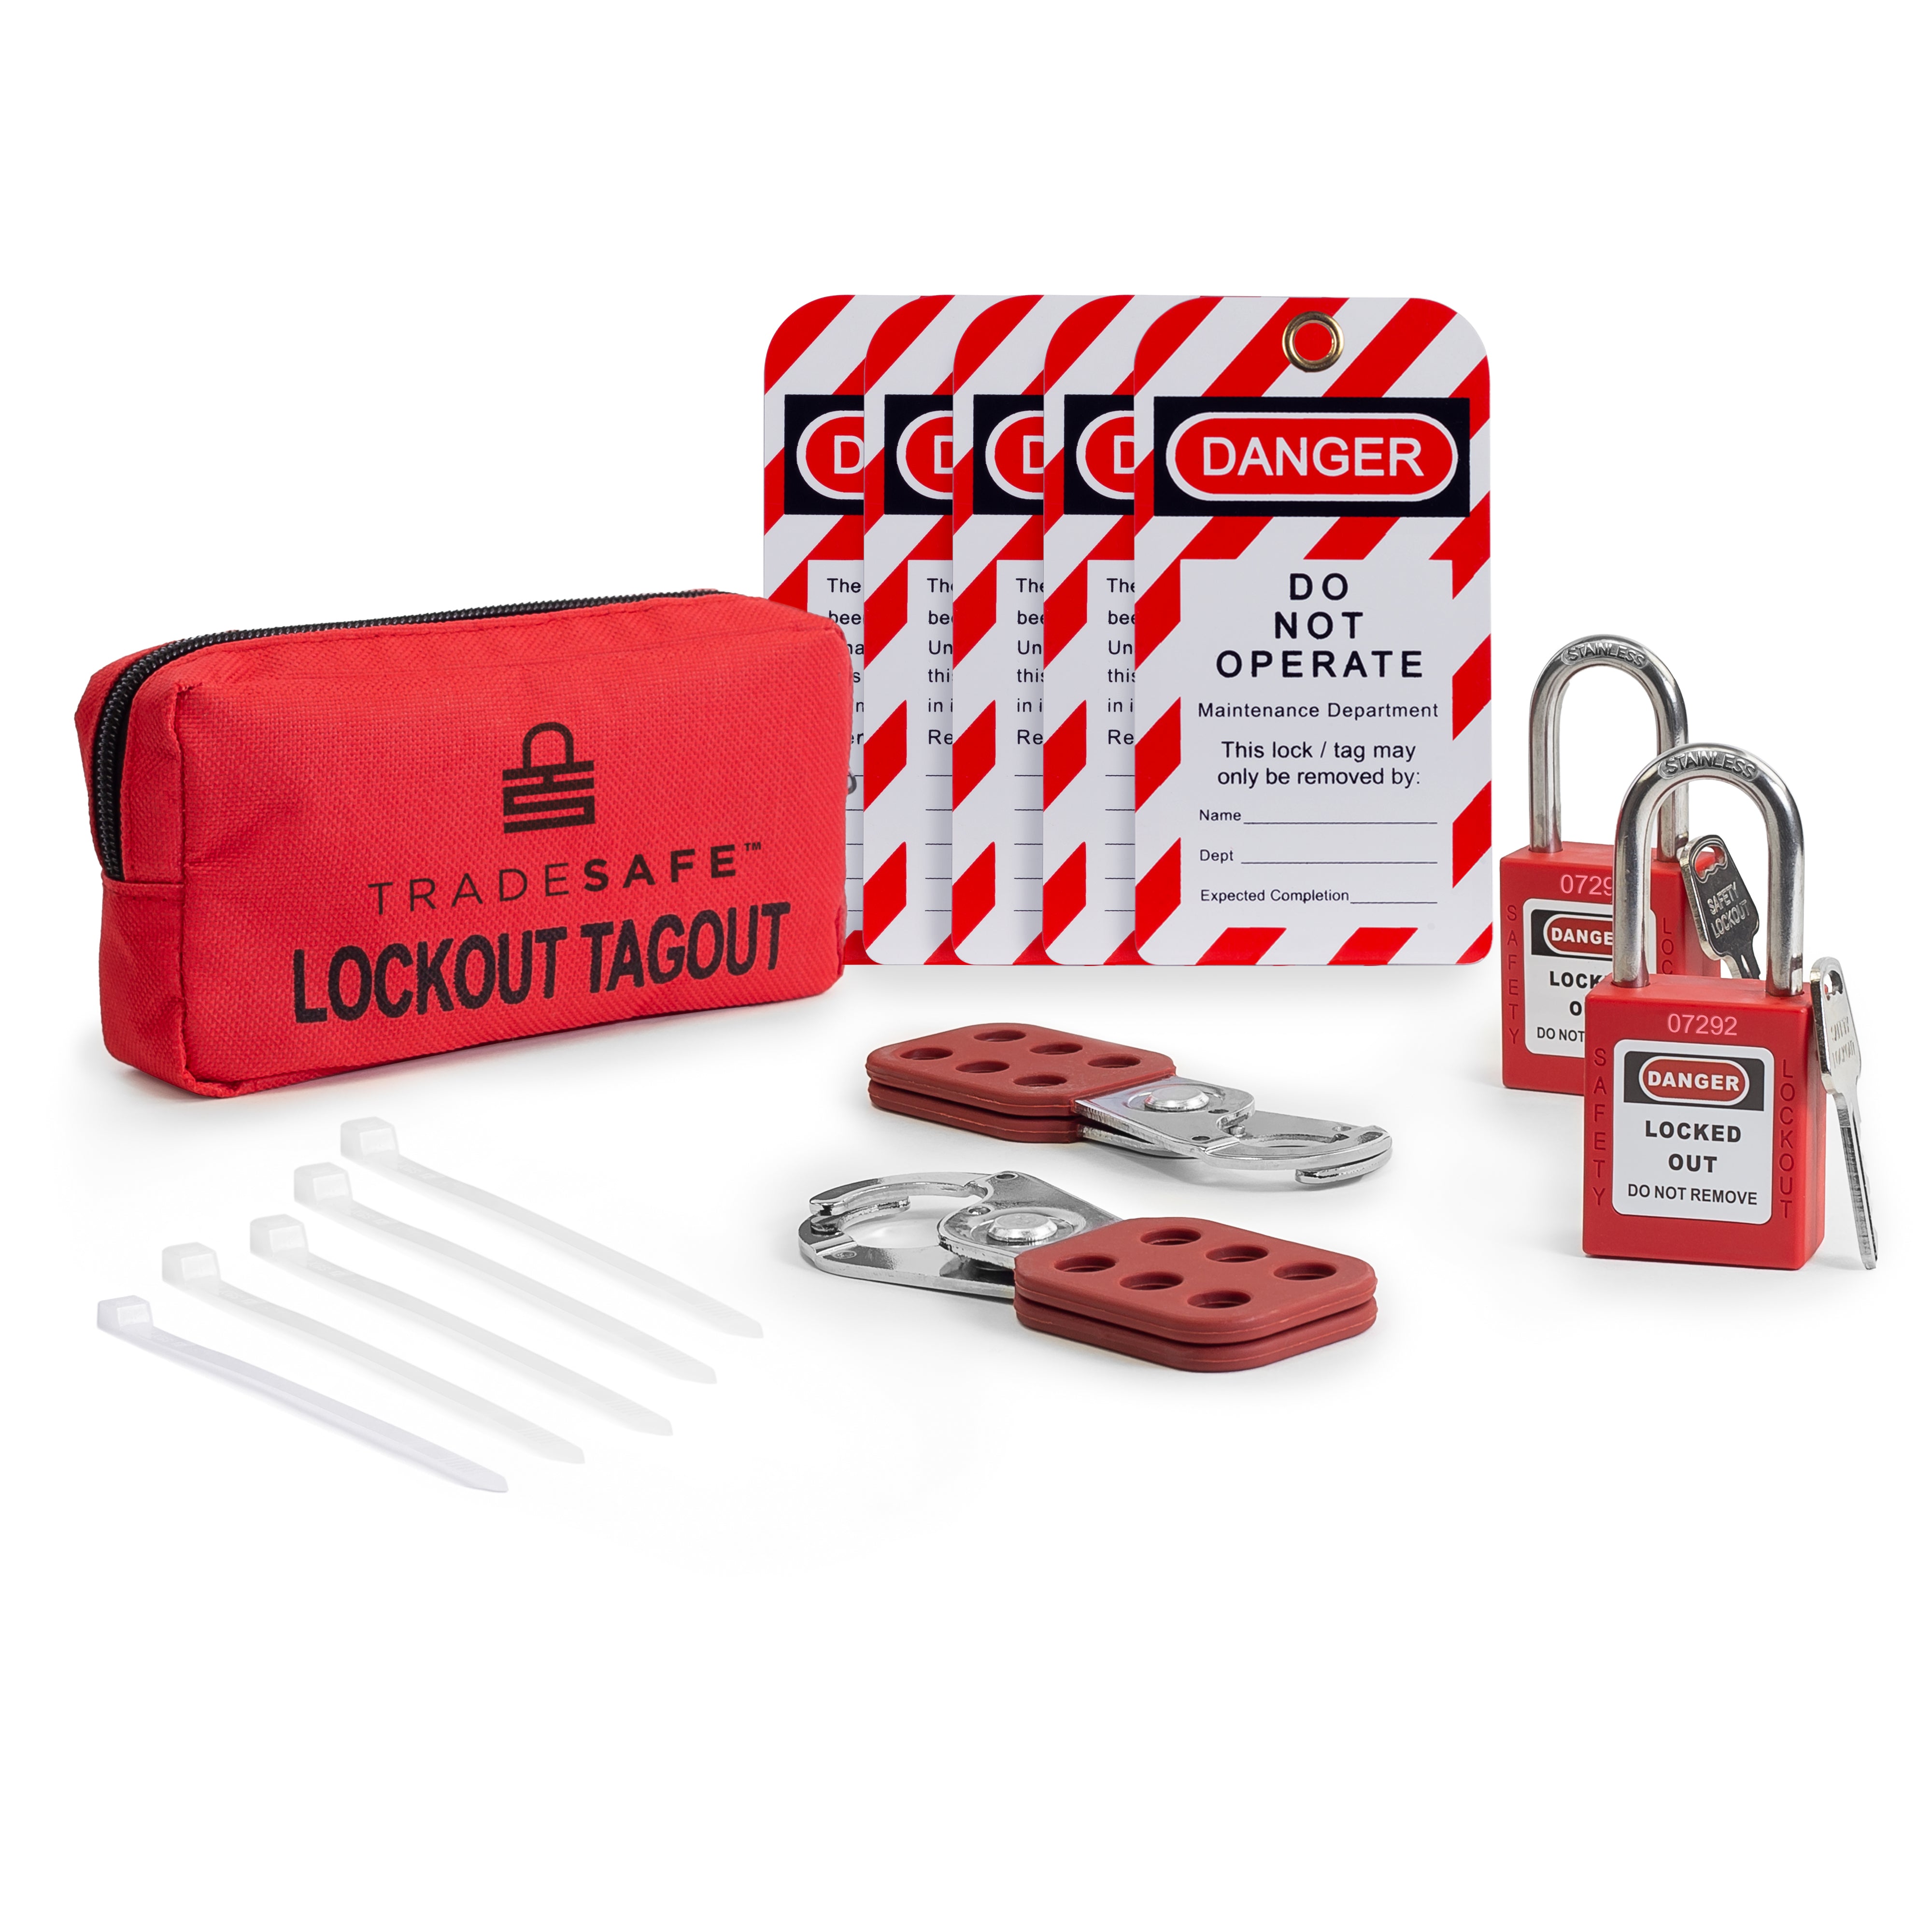 LOTO KIT MECHANICAL - MICRO - LOTO SAFETY PRODUCTS